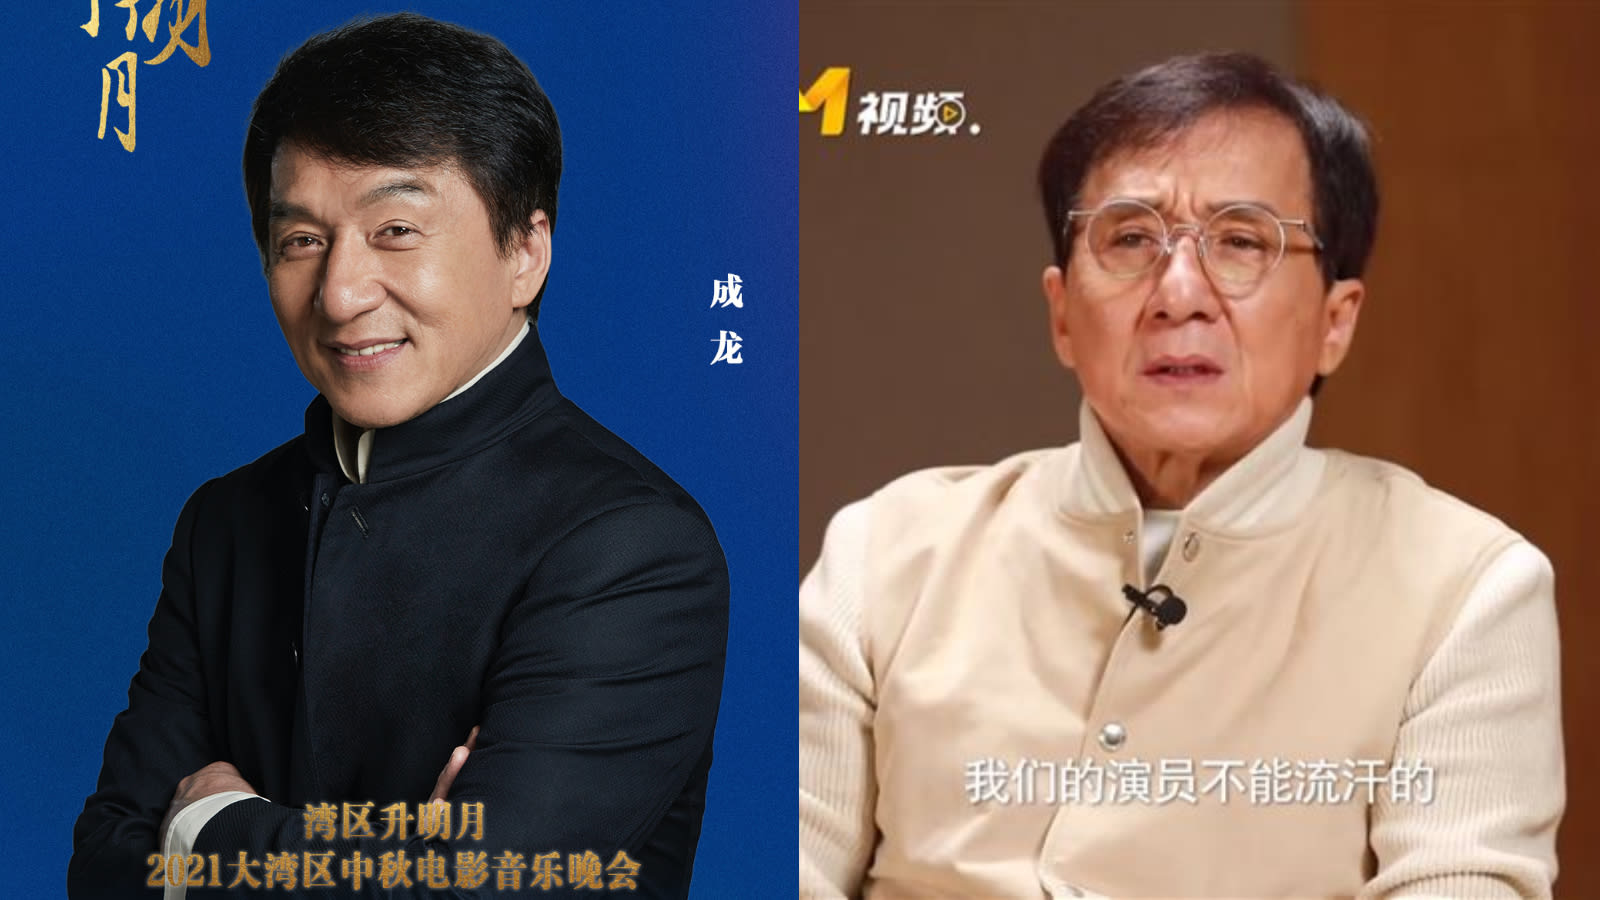 Jackie Chan Says Young Actors These Days “Don't Want To Sweat” And Are Often “The Last To Arrive And The First To Leave”